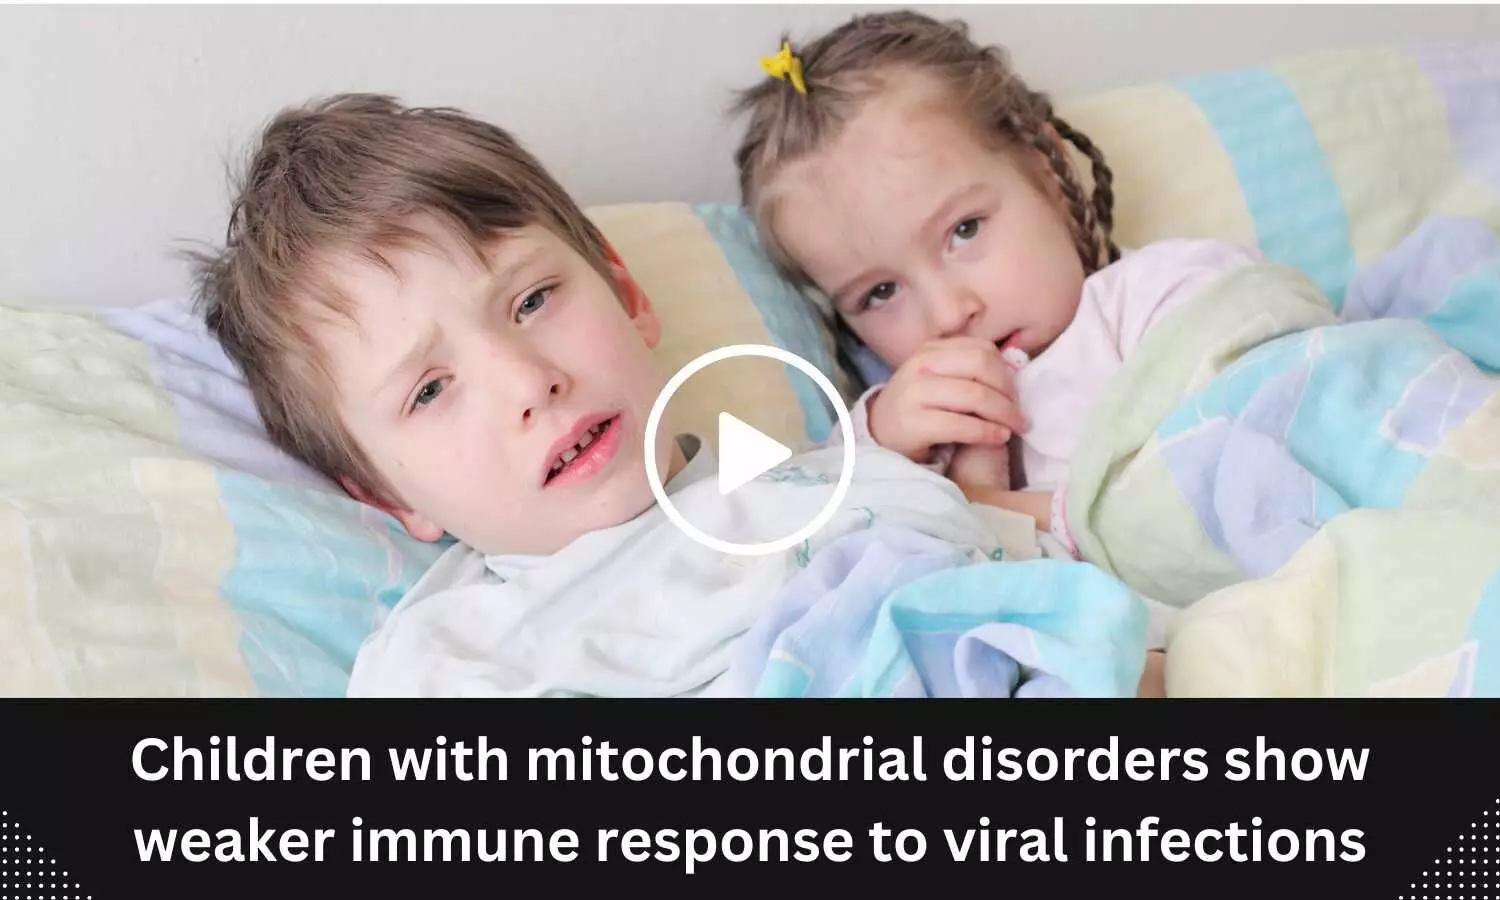 Children with mitochondrial disorders show weaker immune response to viral infections